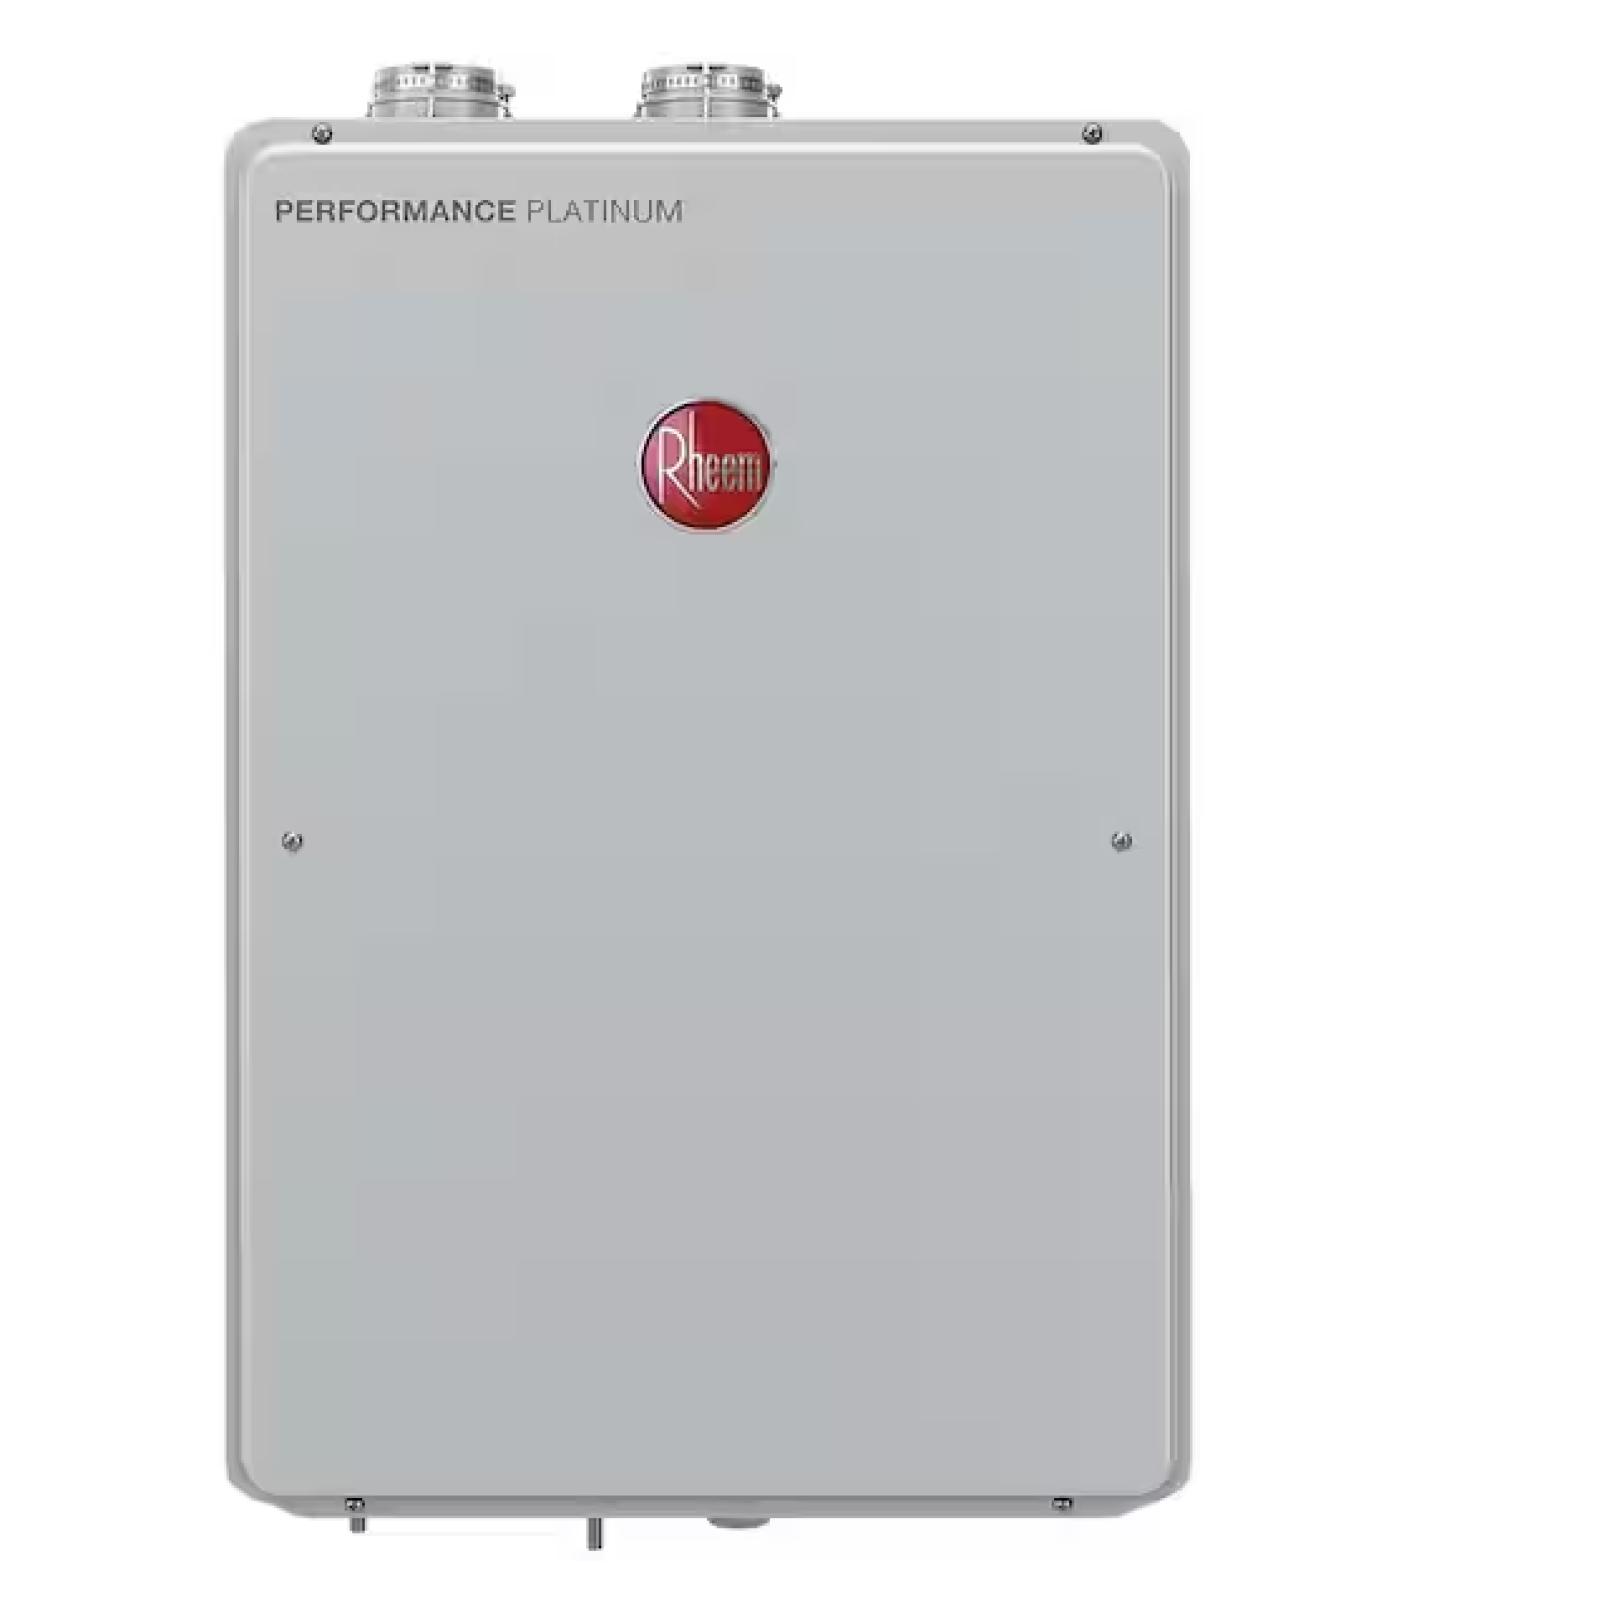 LIKE NEW! - Rheem Performance Platinum 9.5 GPM Natural Gas High Efficiency Indoor Tankless Water Heater